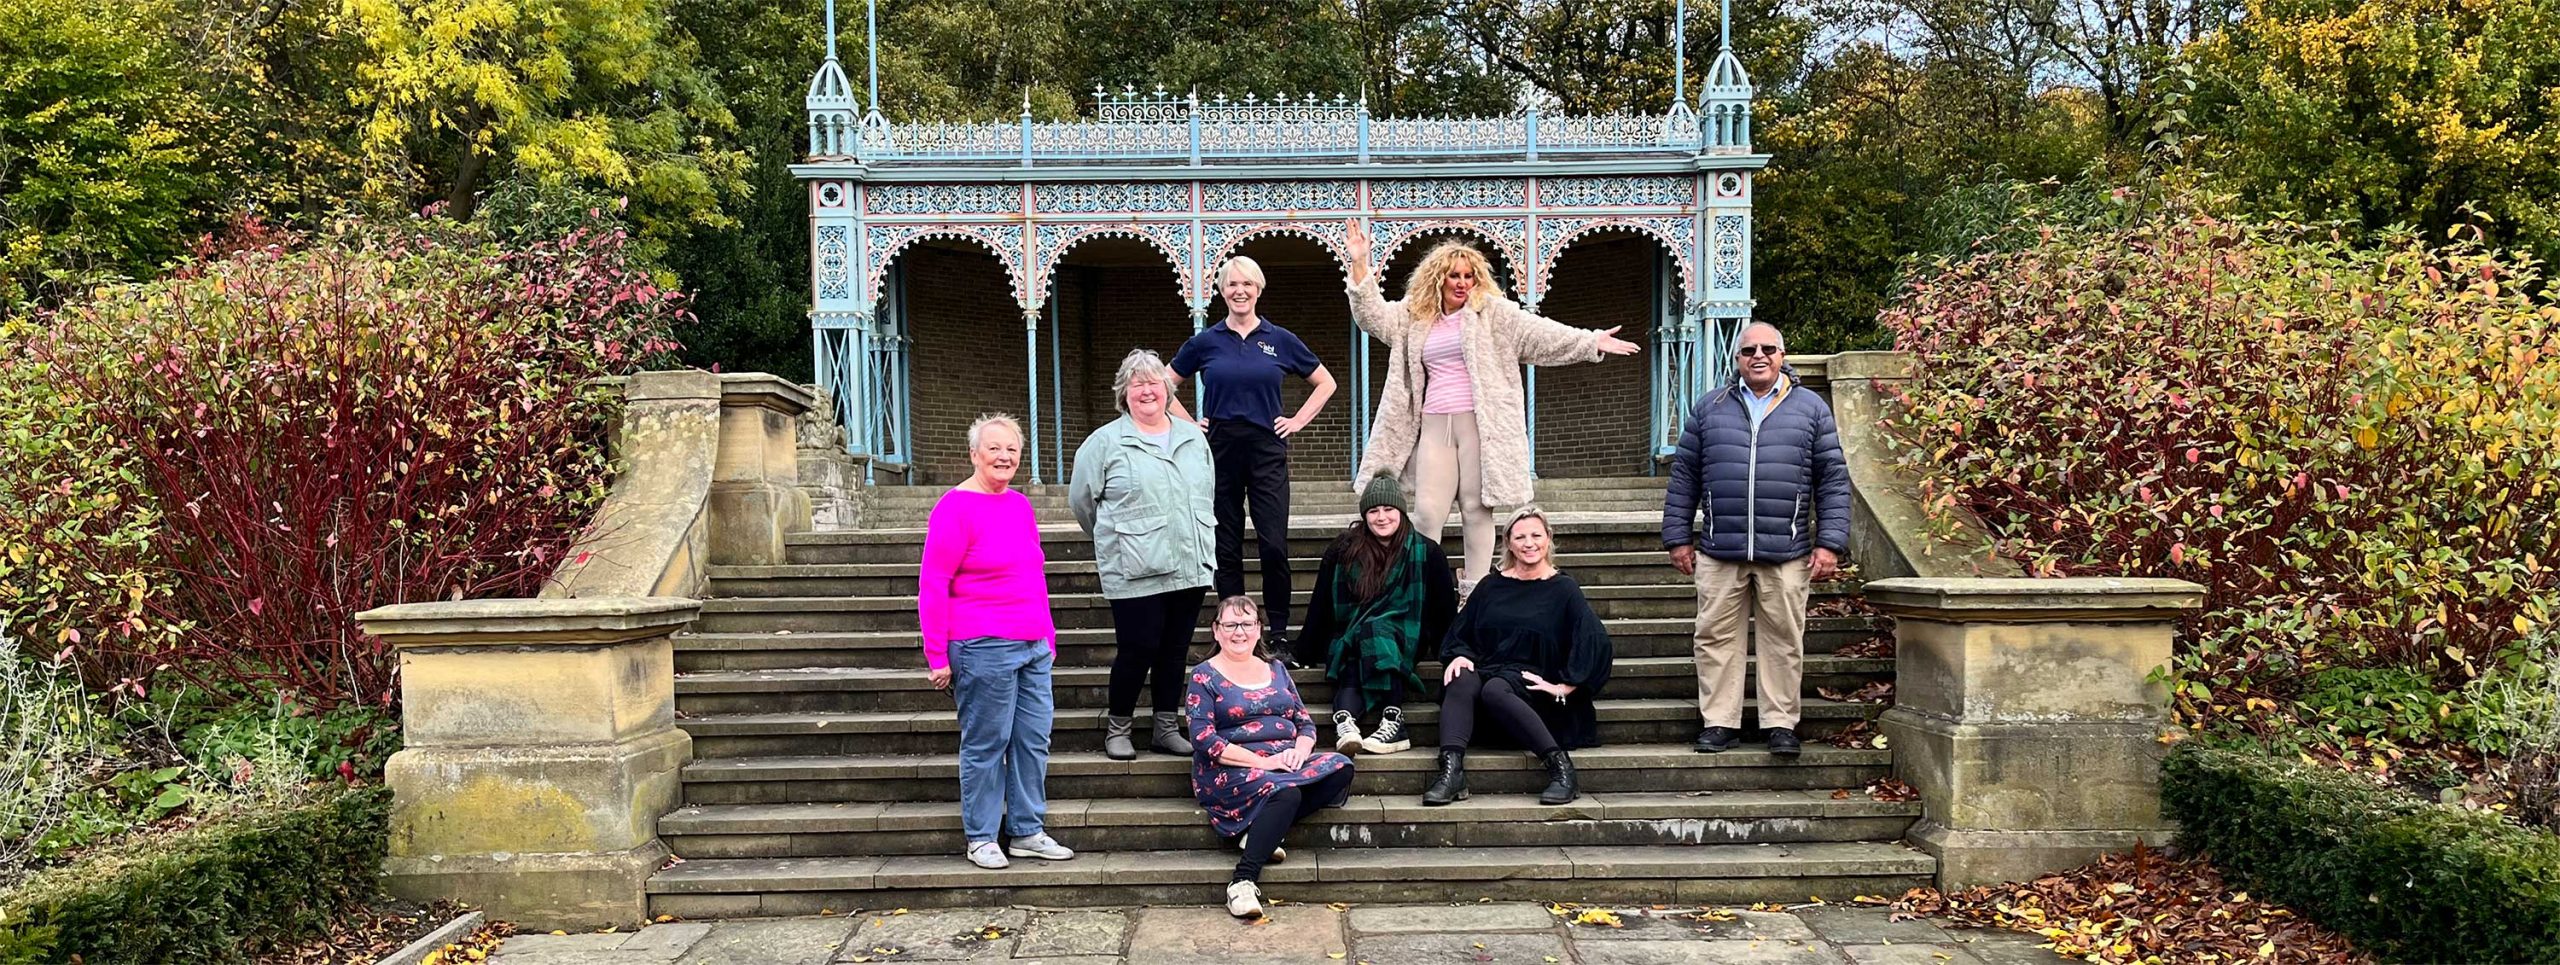 Members posing for photo on steps in local park